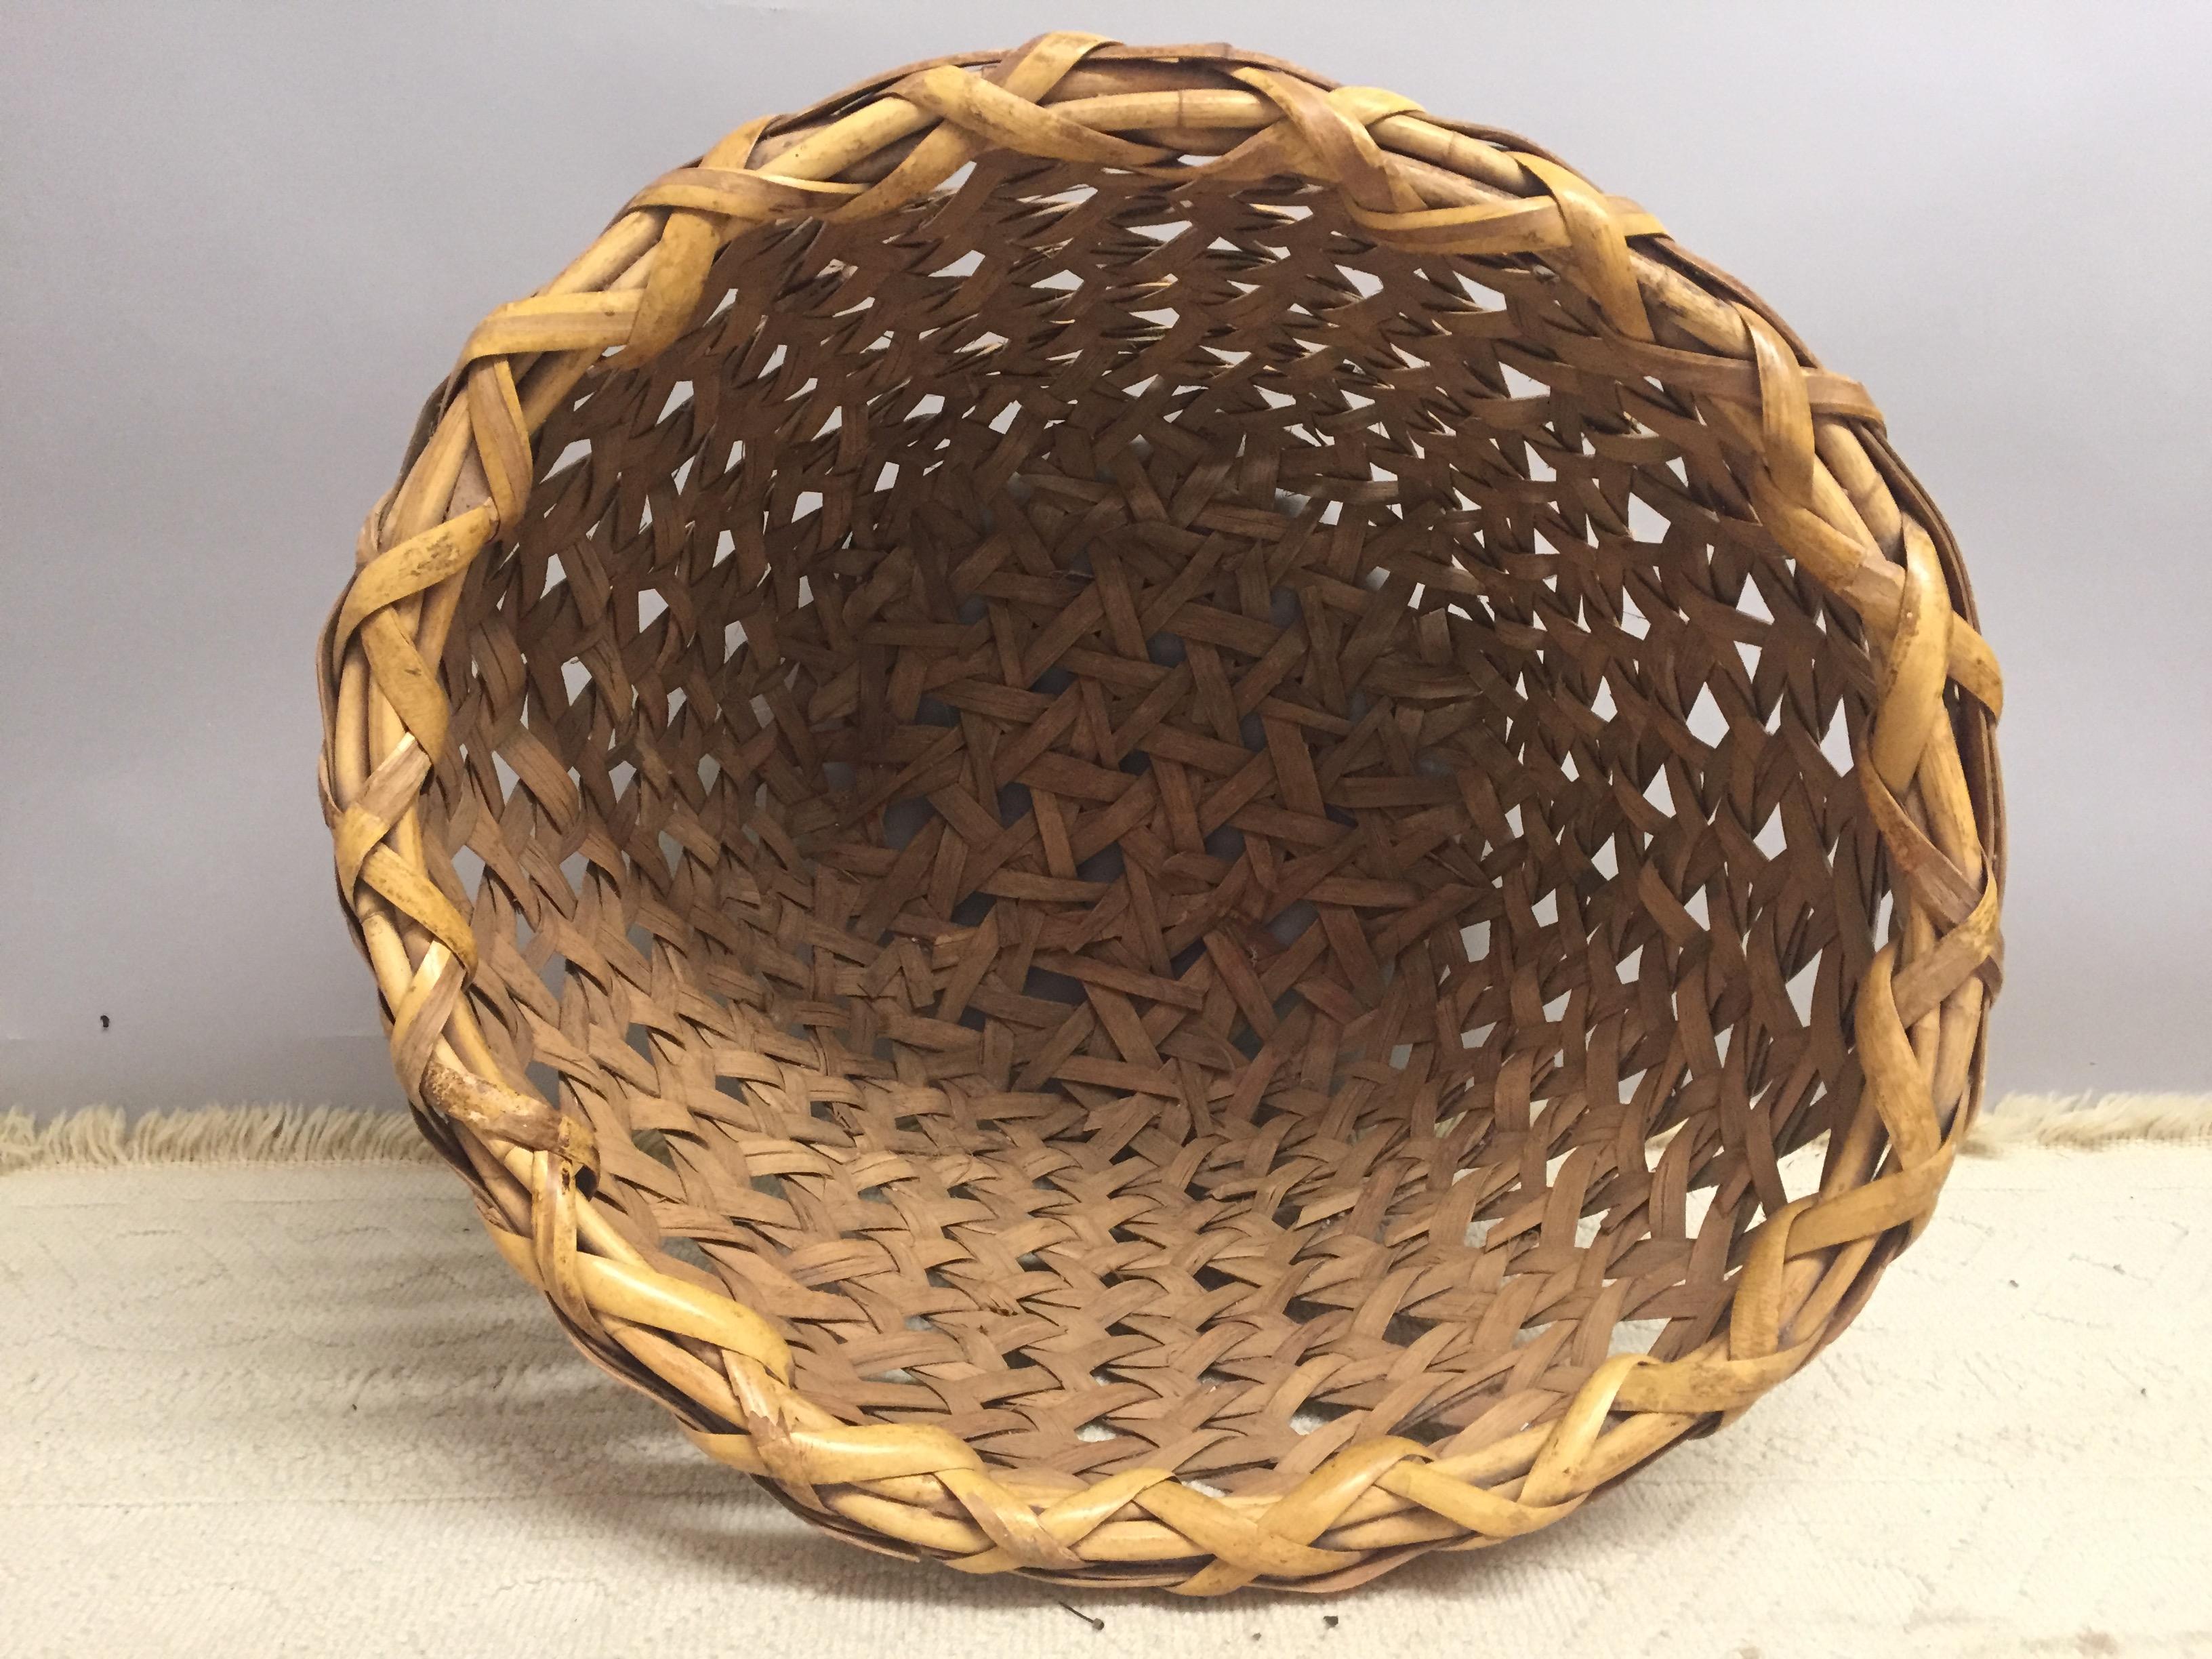 Beautifully hand woven wicker basket in an impressive size. 
Measures: Interior depth 18.